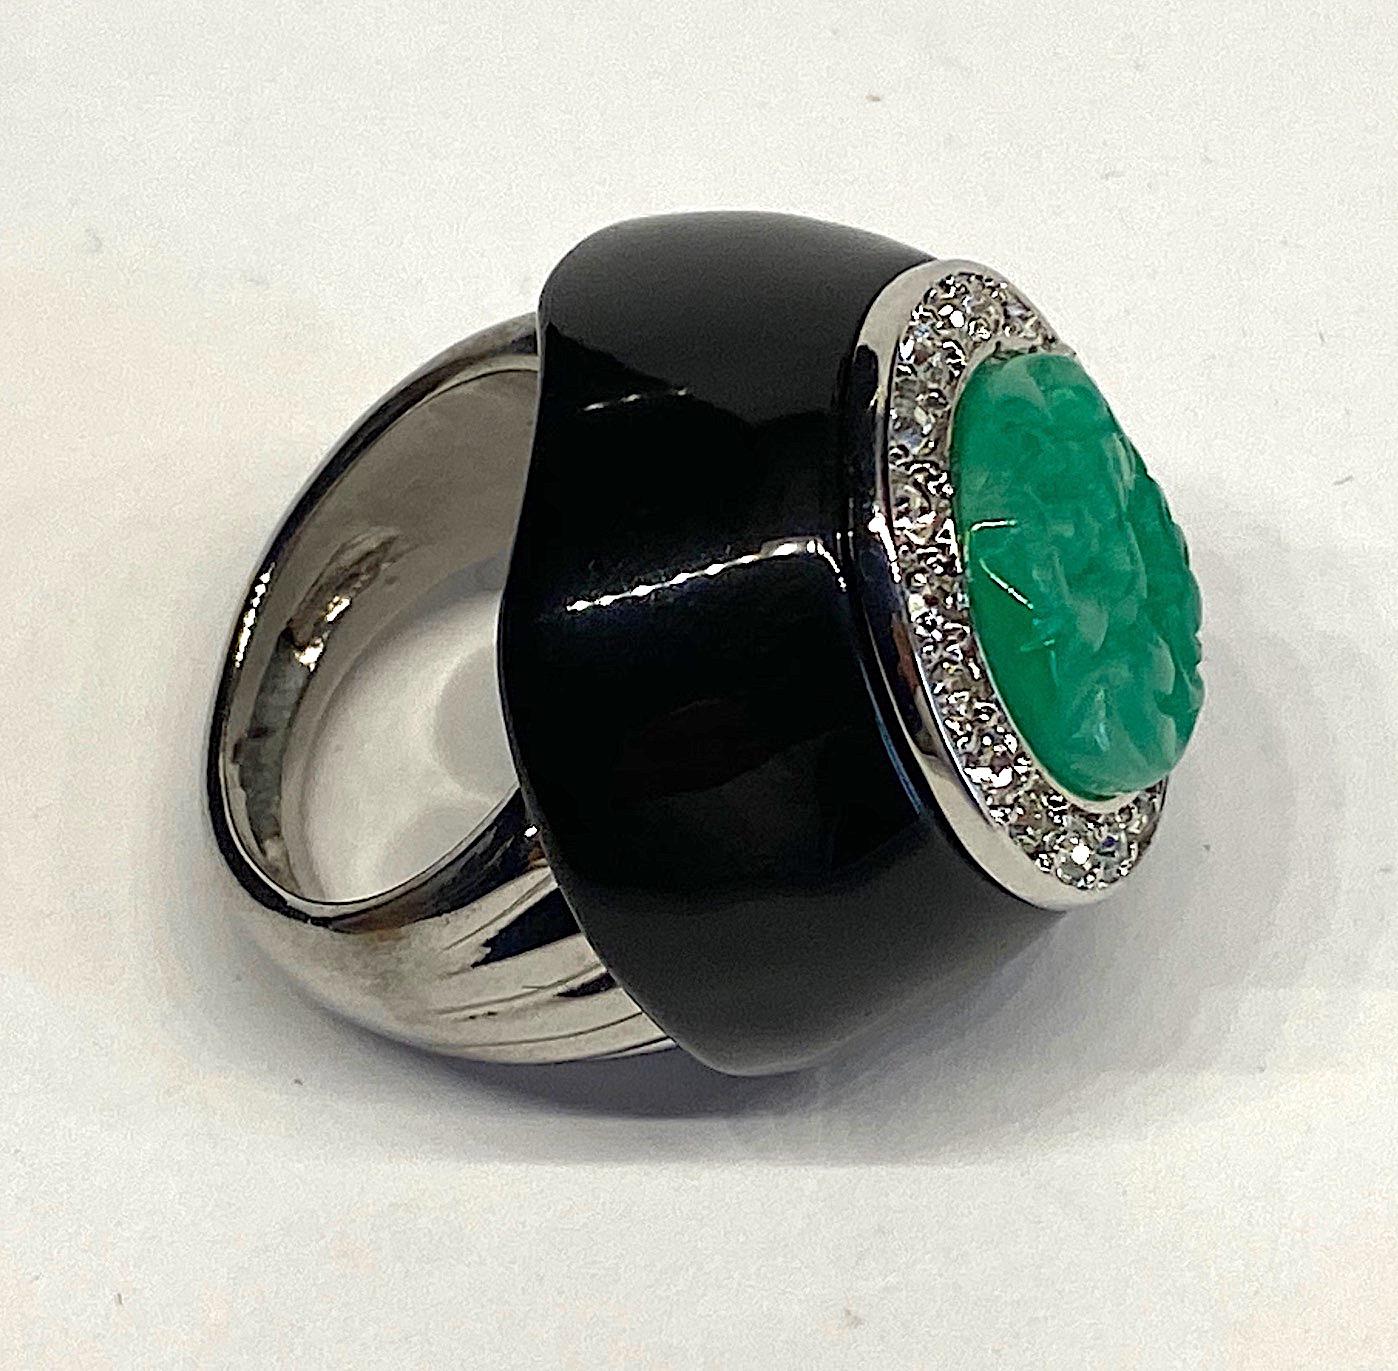 Kenneth Jay Lane 1980s Art Deco Black & Green Dome Ring 4